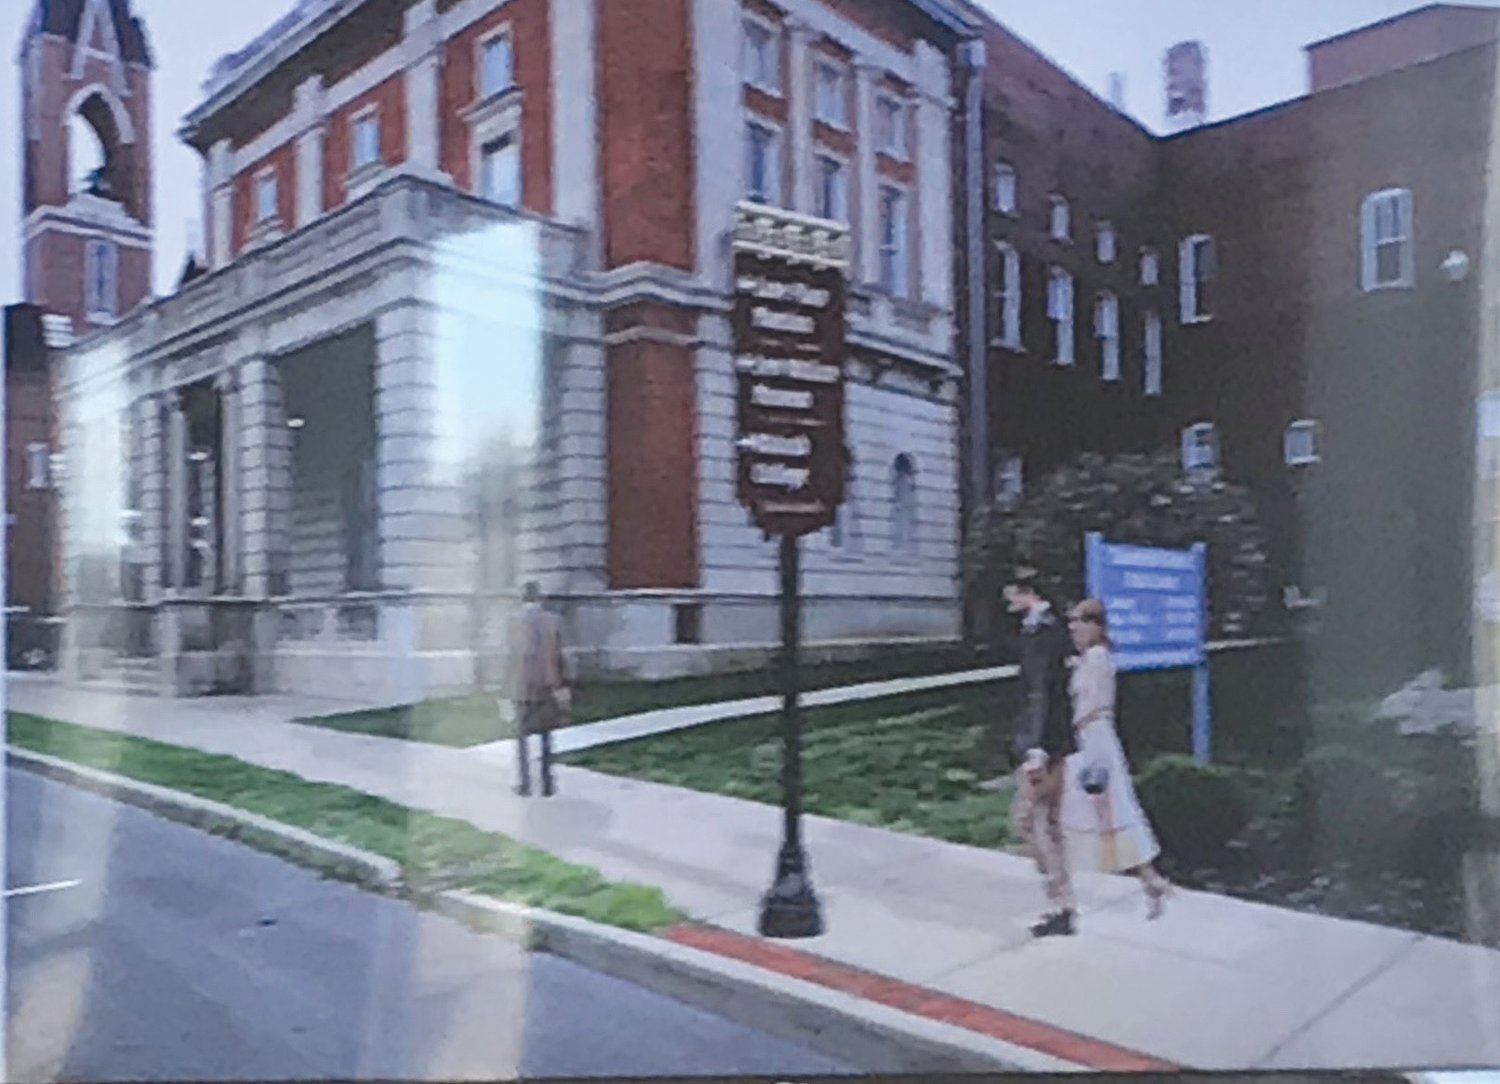 A preliminary design for wayfinding signs in Crawfordsville and Montgomery County were unveiled last year. The signs are meant to help pedestrians and drivers navigate the area.